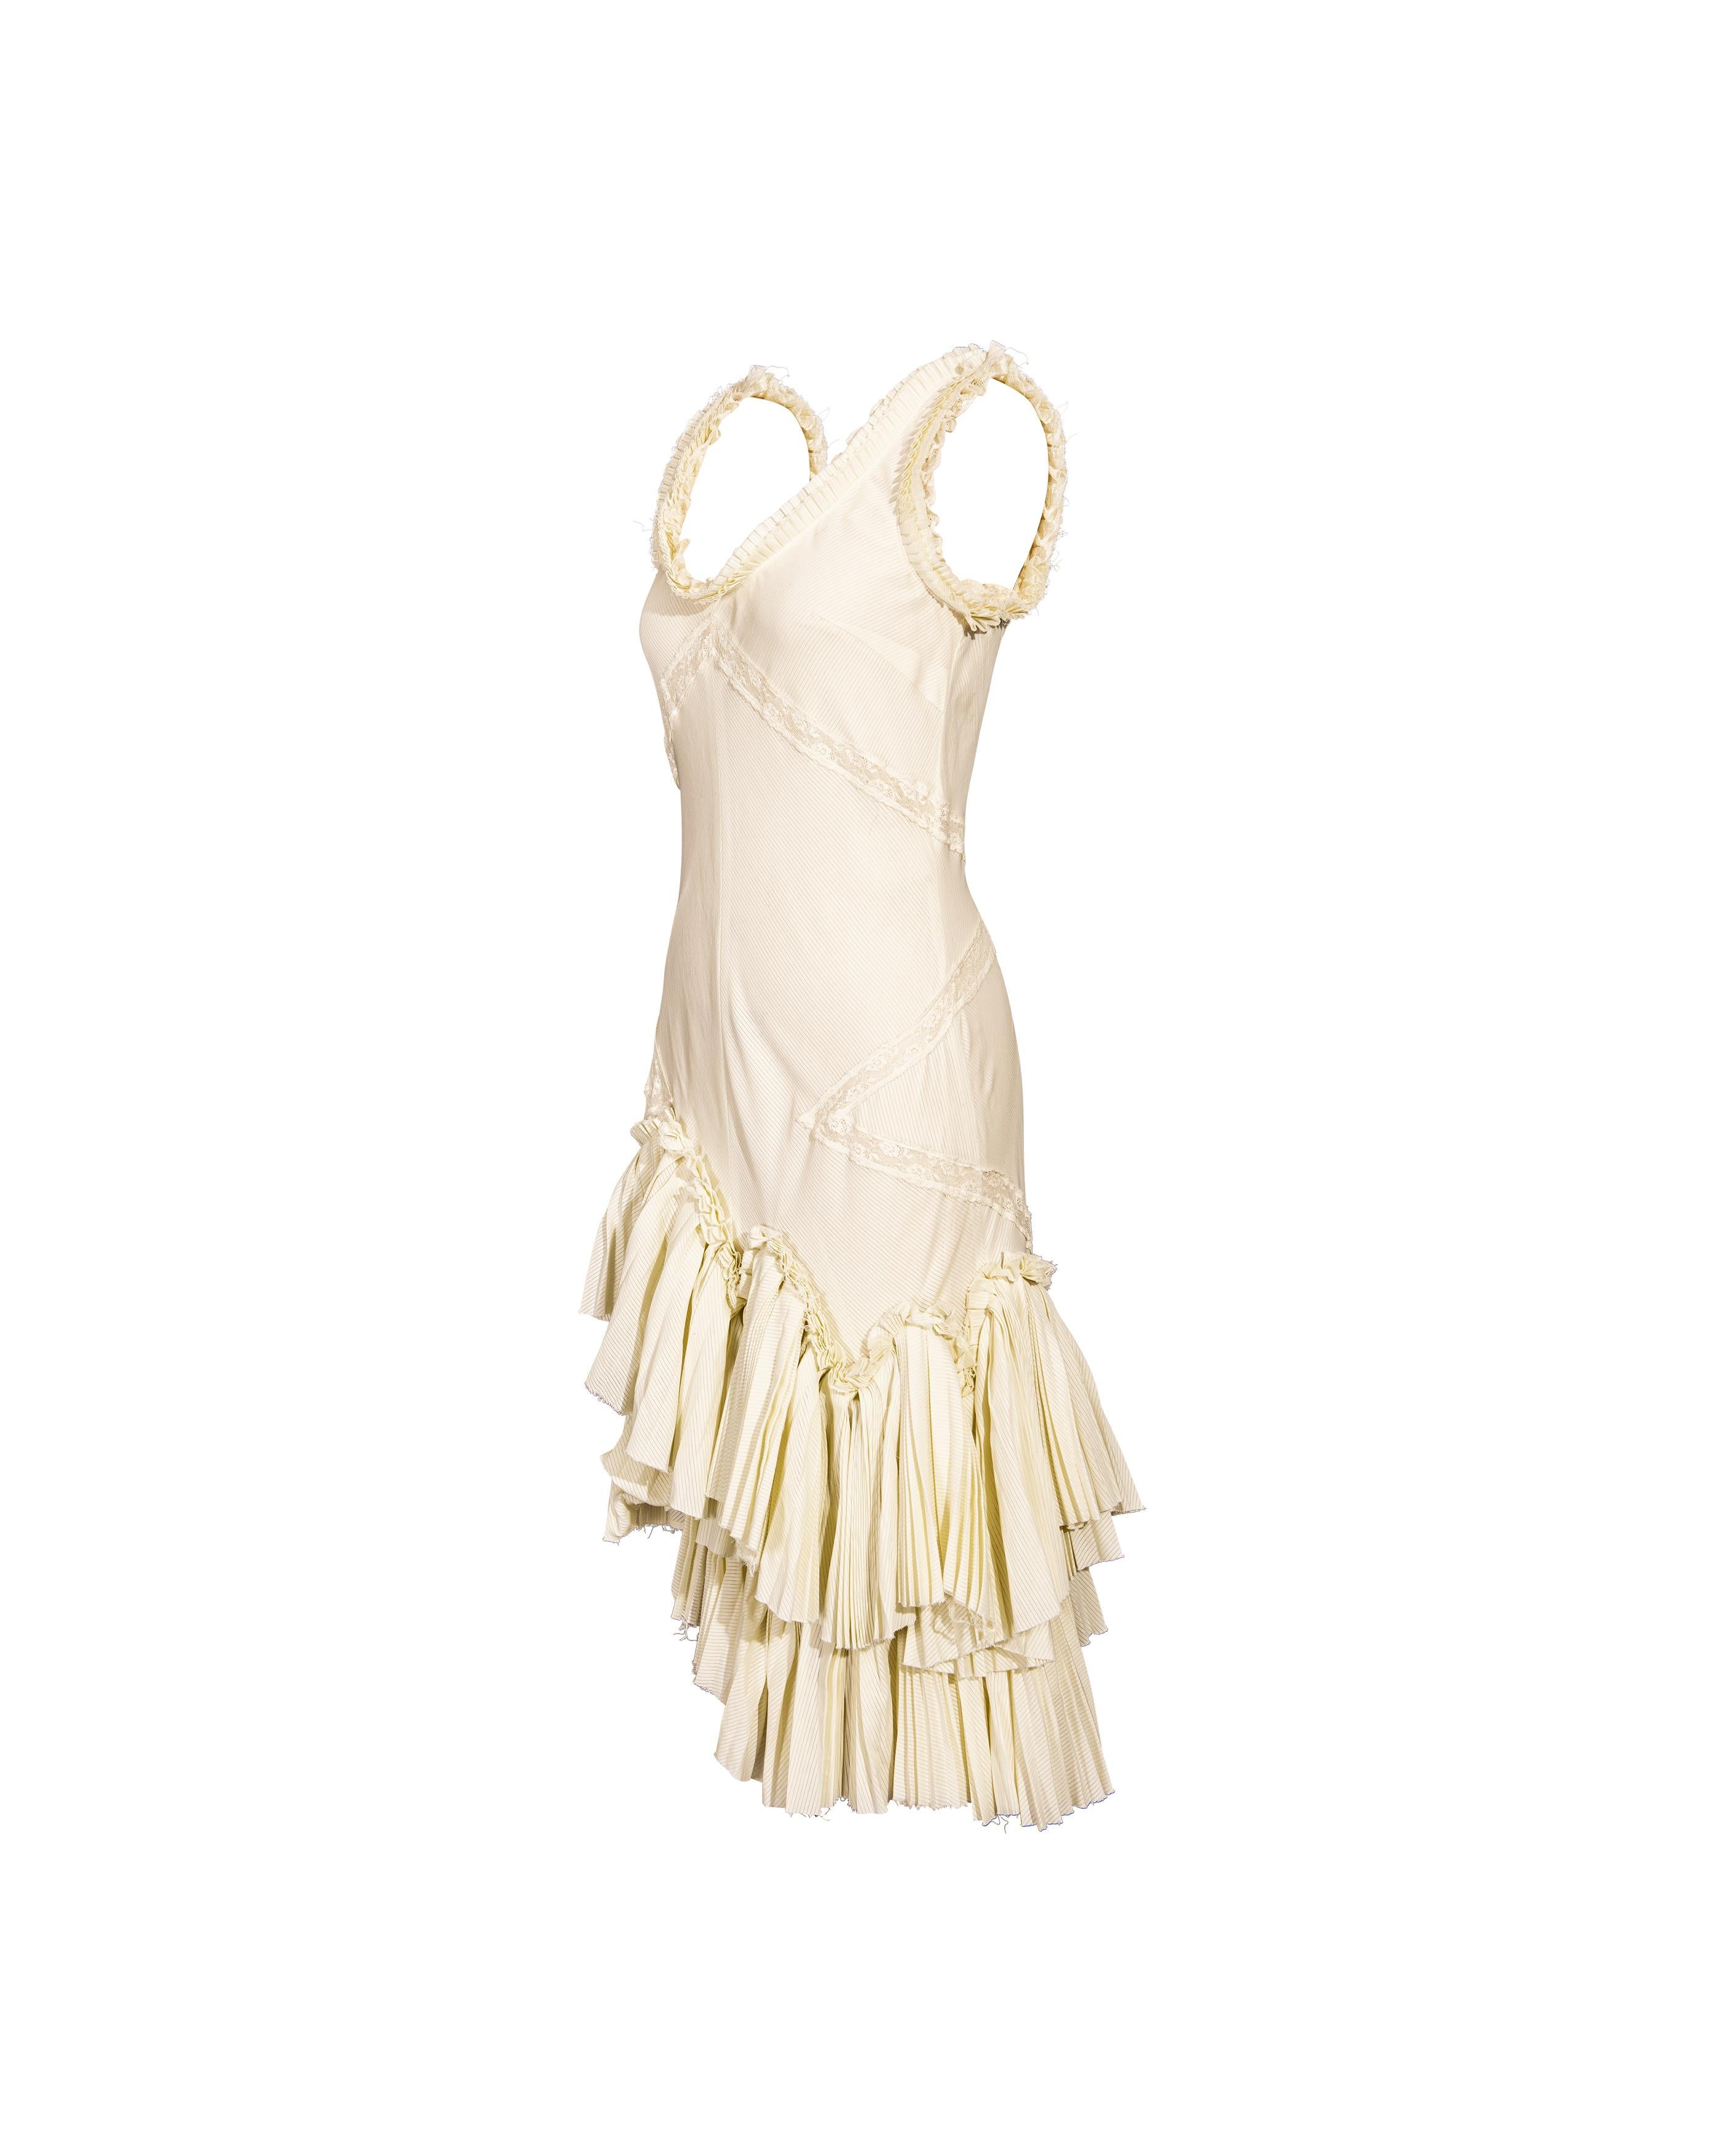 S/S 2005 Alexander McQueen (Lifetime) Pale Yellow Pleated and Lace Cotton Dress In Excellent Condition For Sale In North Hollywood, CA